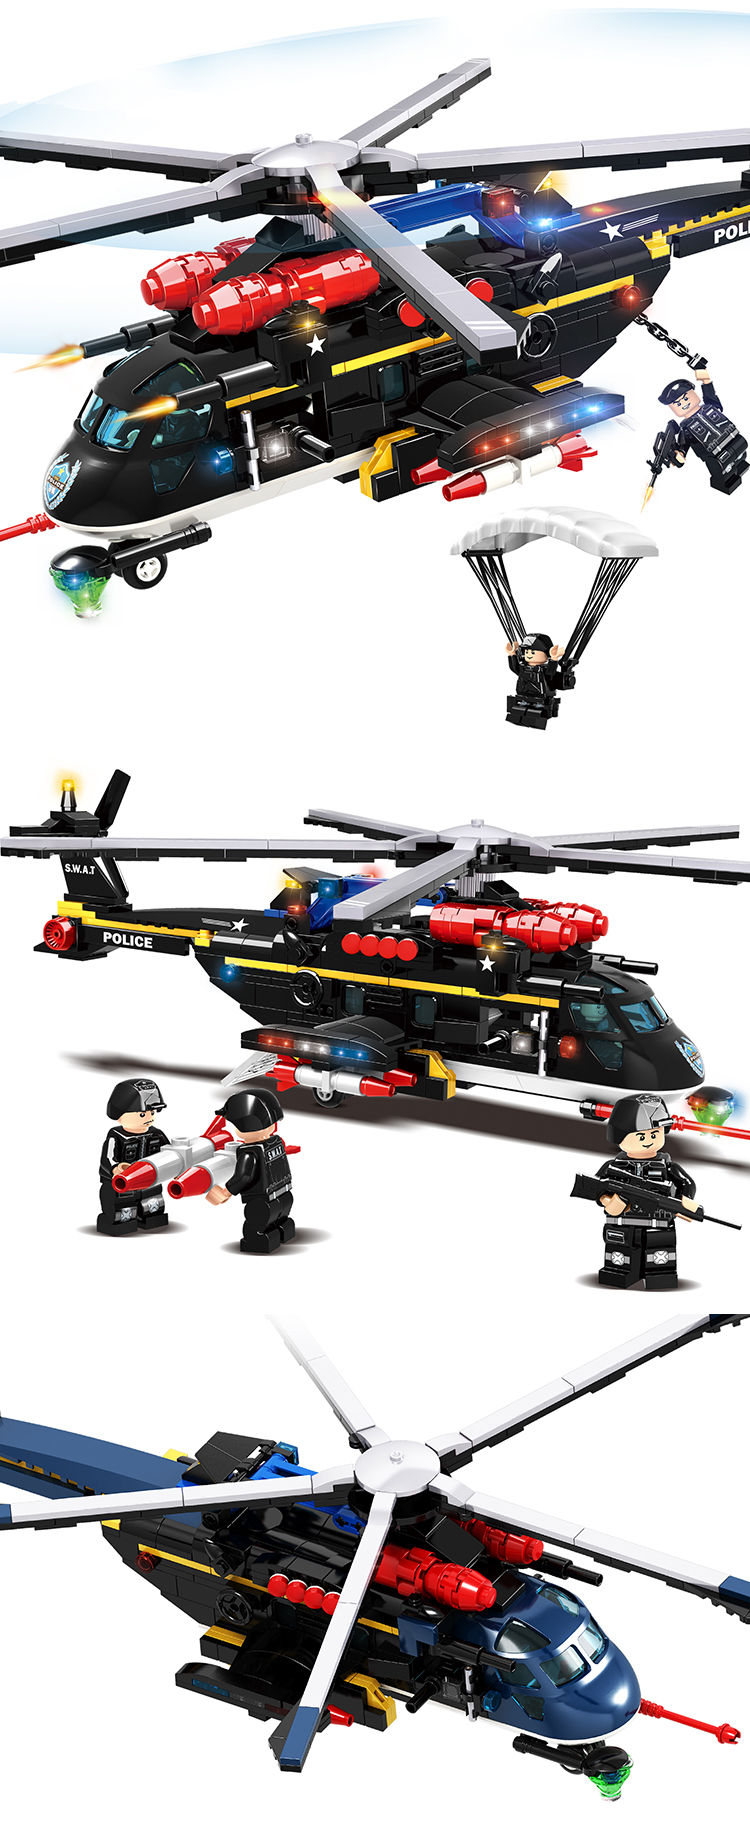 WOMA TOYS Shopee Hot Sale SWAT Helicopter Parachute Plastic Bricks Building Blocks Spielzeug For Children Diy Puzzle